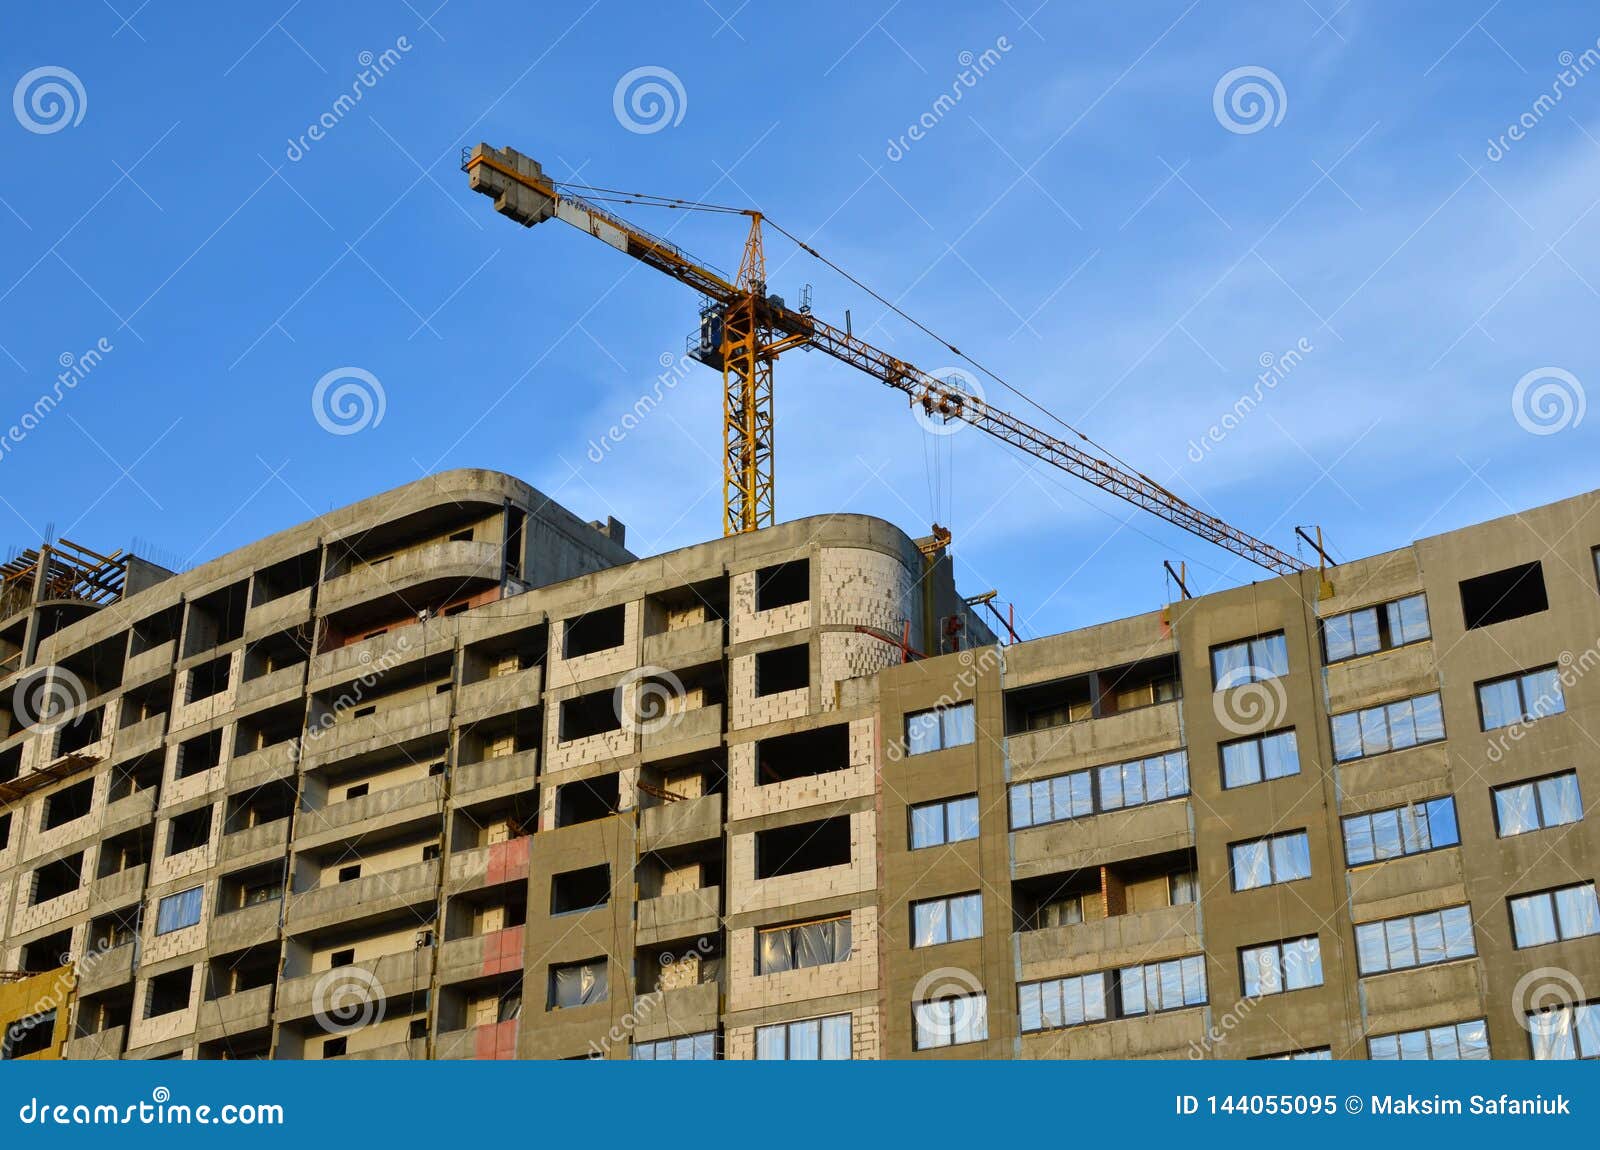 Large Construction  Site  With Cranes On The Blue Sky 